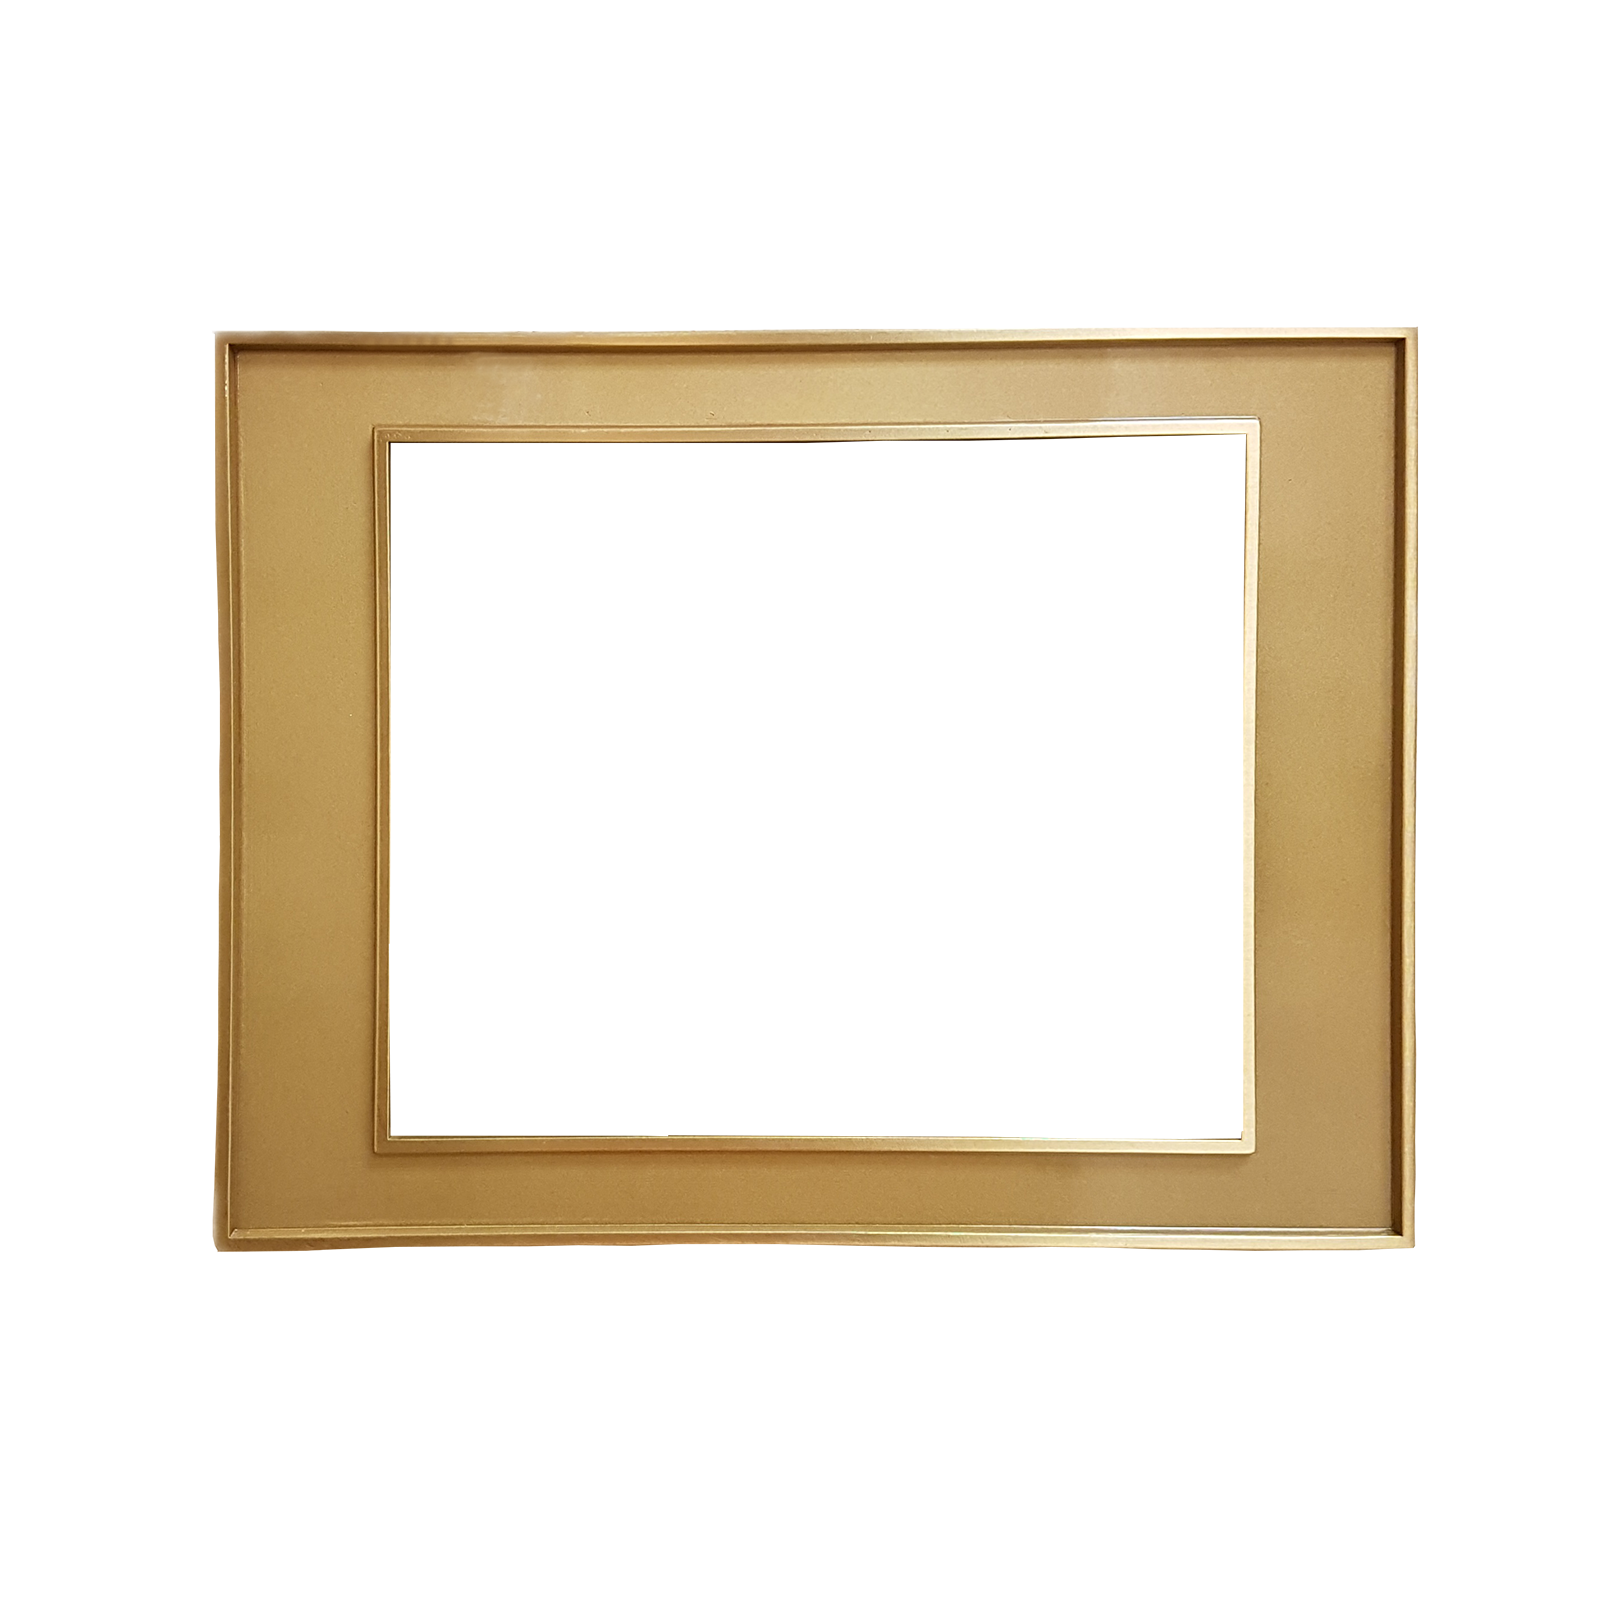 RitePlaque Frame only 8.25″ x 6.25″